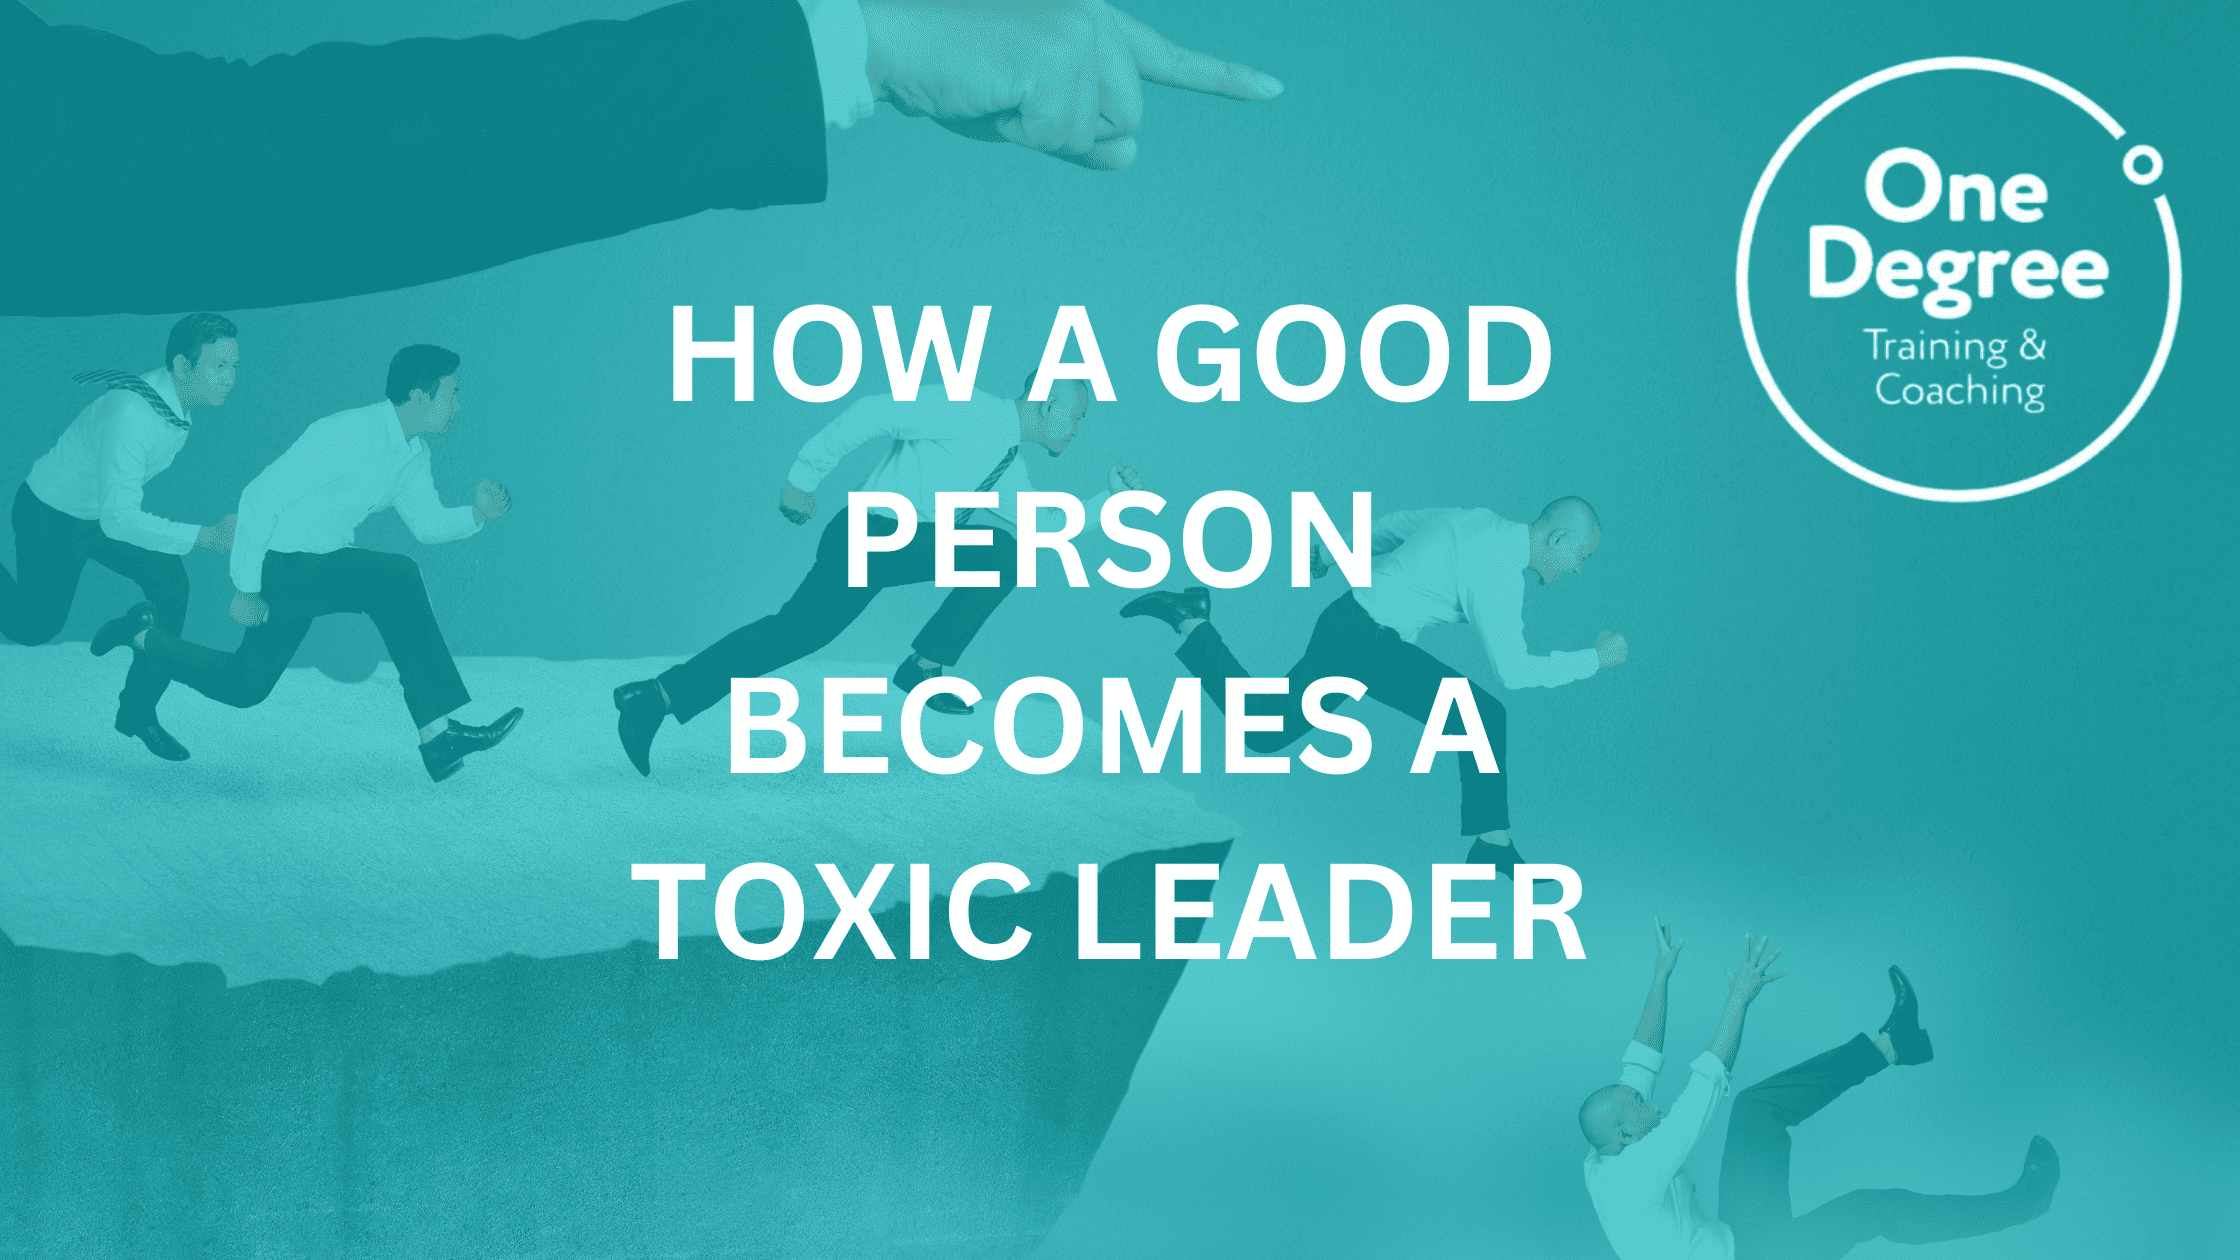 How a good person becomes a toxic leader